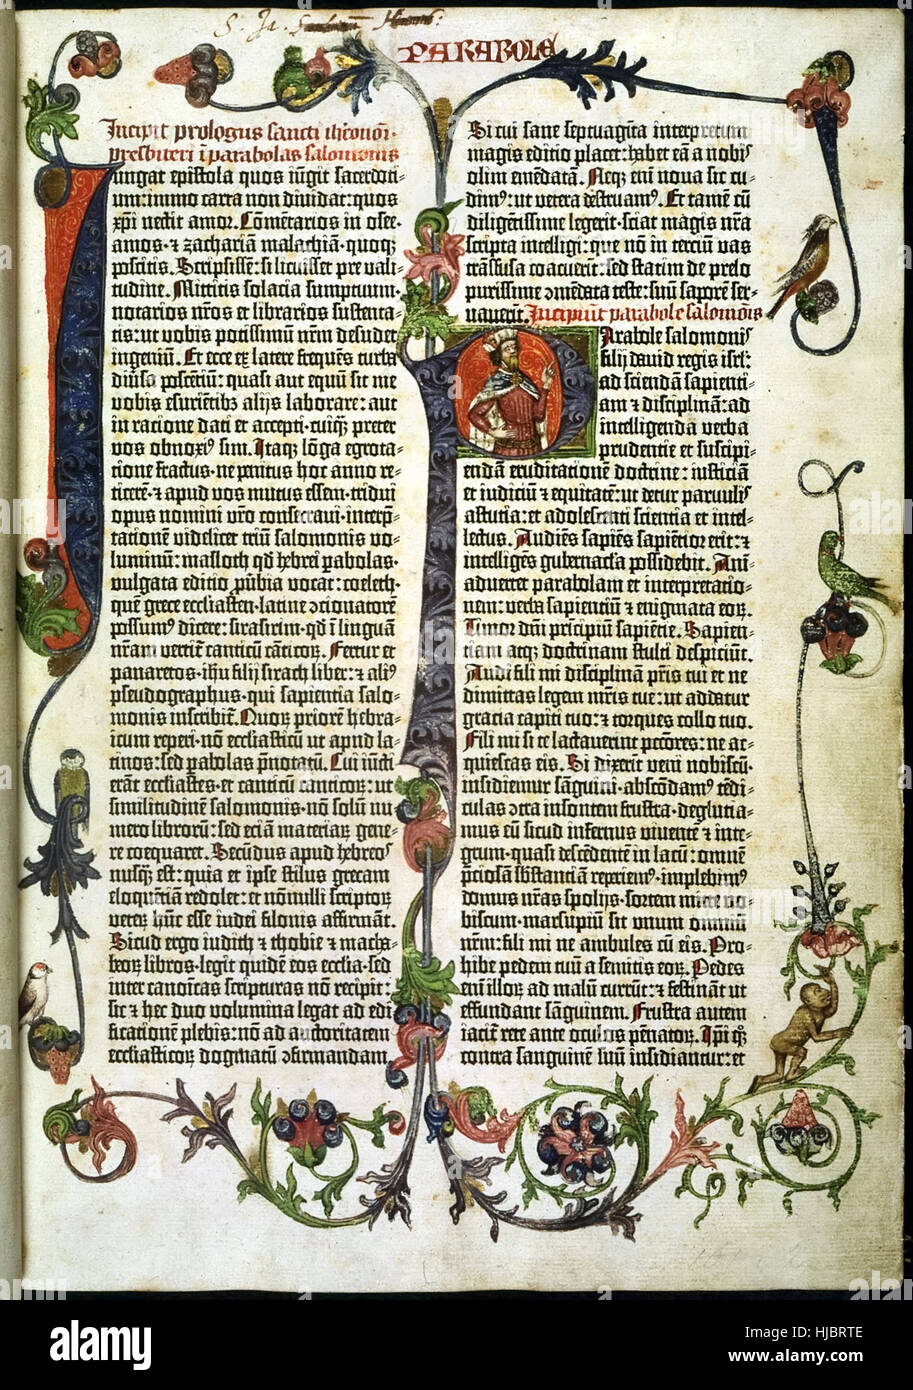 Page from the ‘Gutenberg Bible’ the first mass-produced book printed in Mainz, Germany in 1455 by Johann Gutenberg. Page shows showing a large illuminated ‘I’ and ‘P’ featuring a portrait of King Solomon. See description for more information. Stock Photo